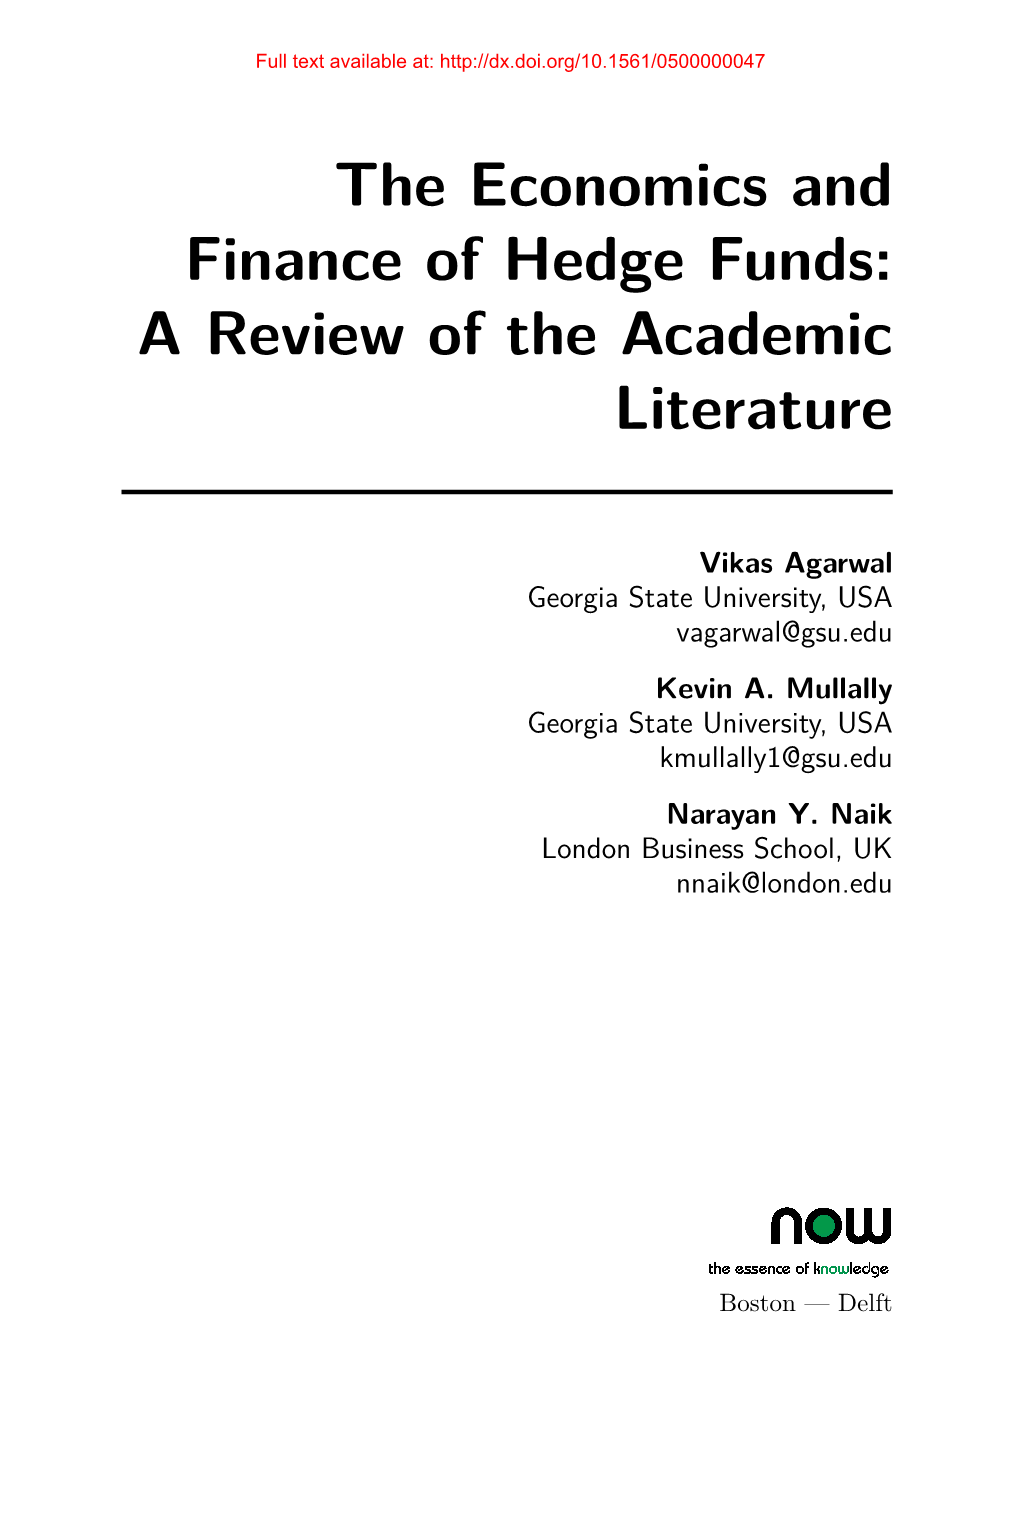 The Economics and Finance of Hedge Funds: a Review of the Academic Literature